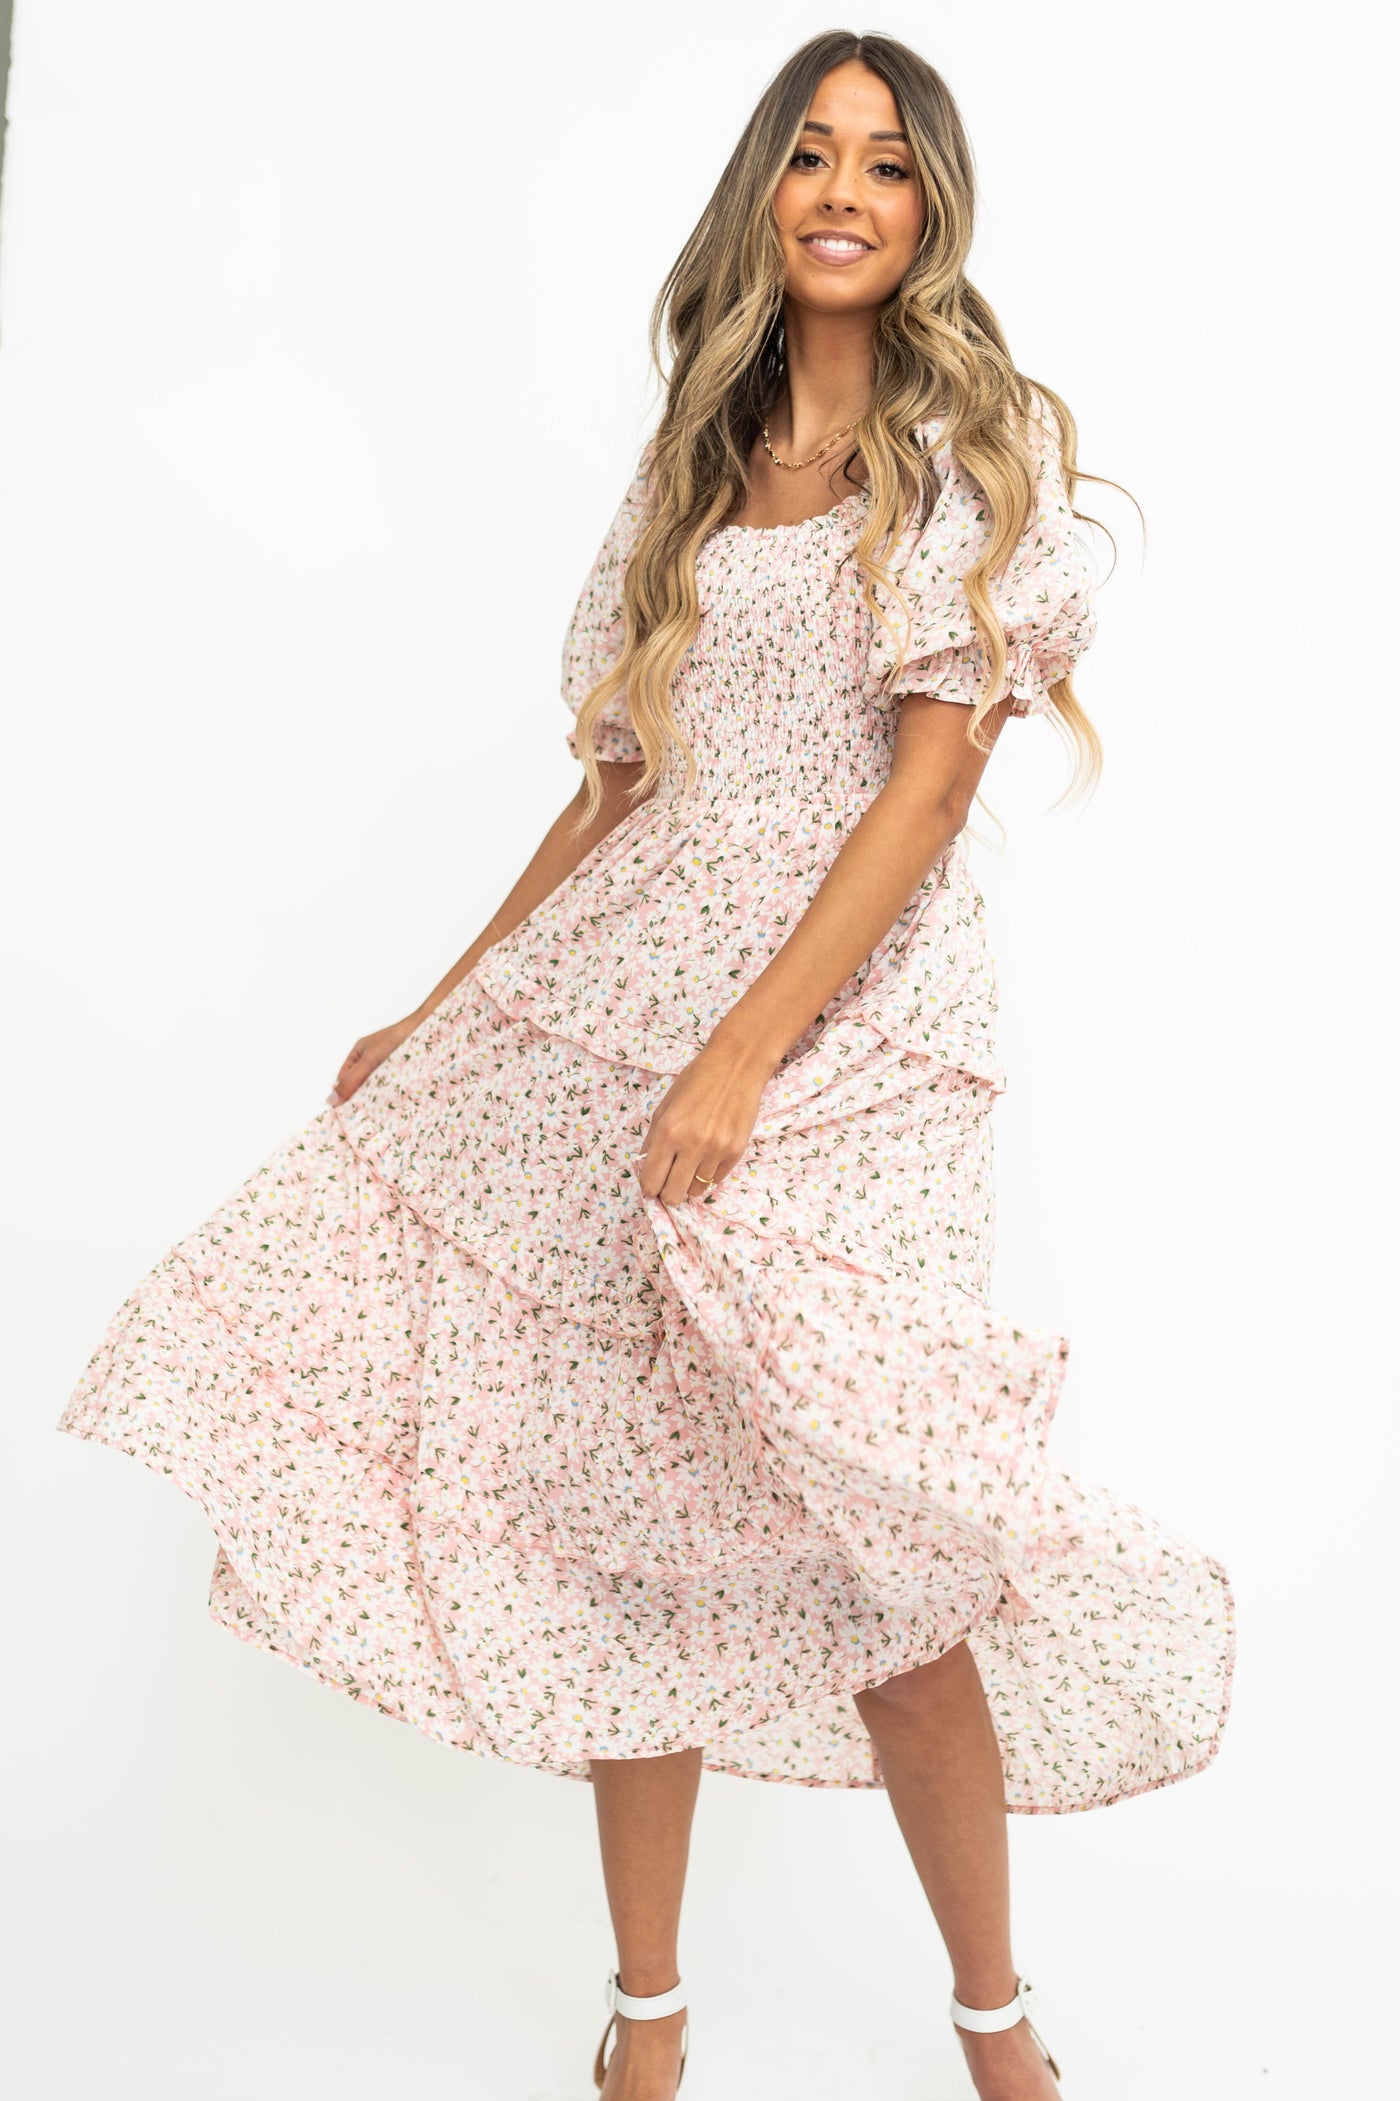 Short sleeve pink floral dress with smocked bodice